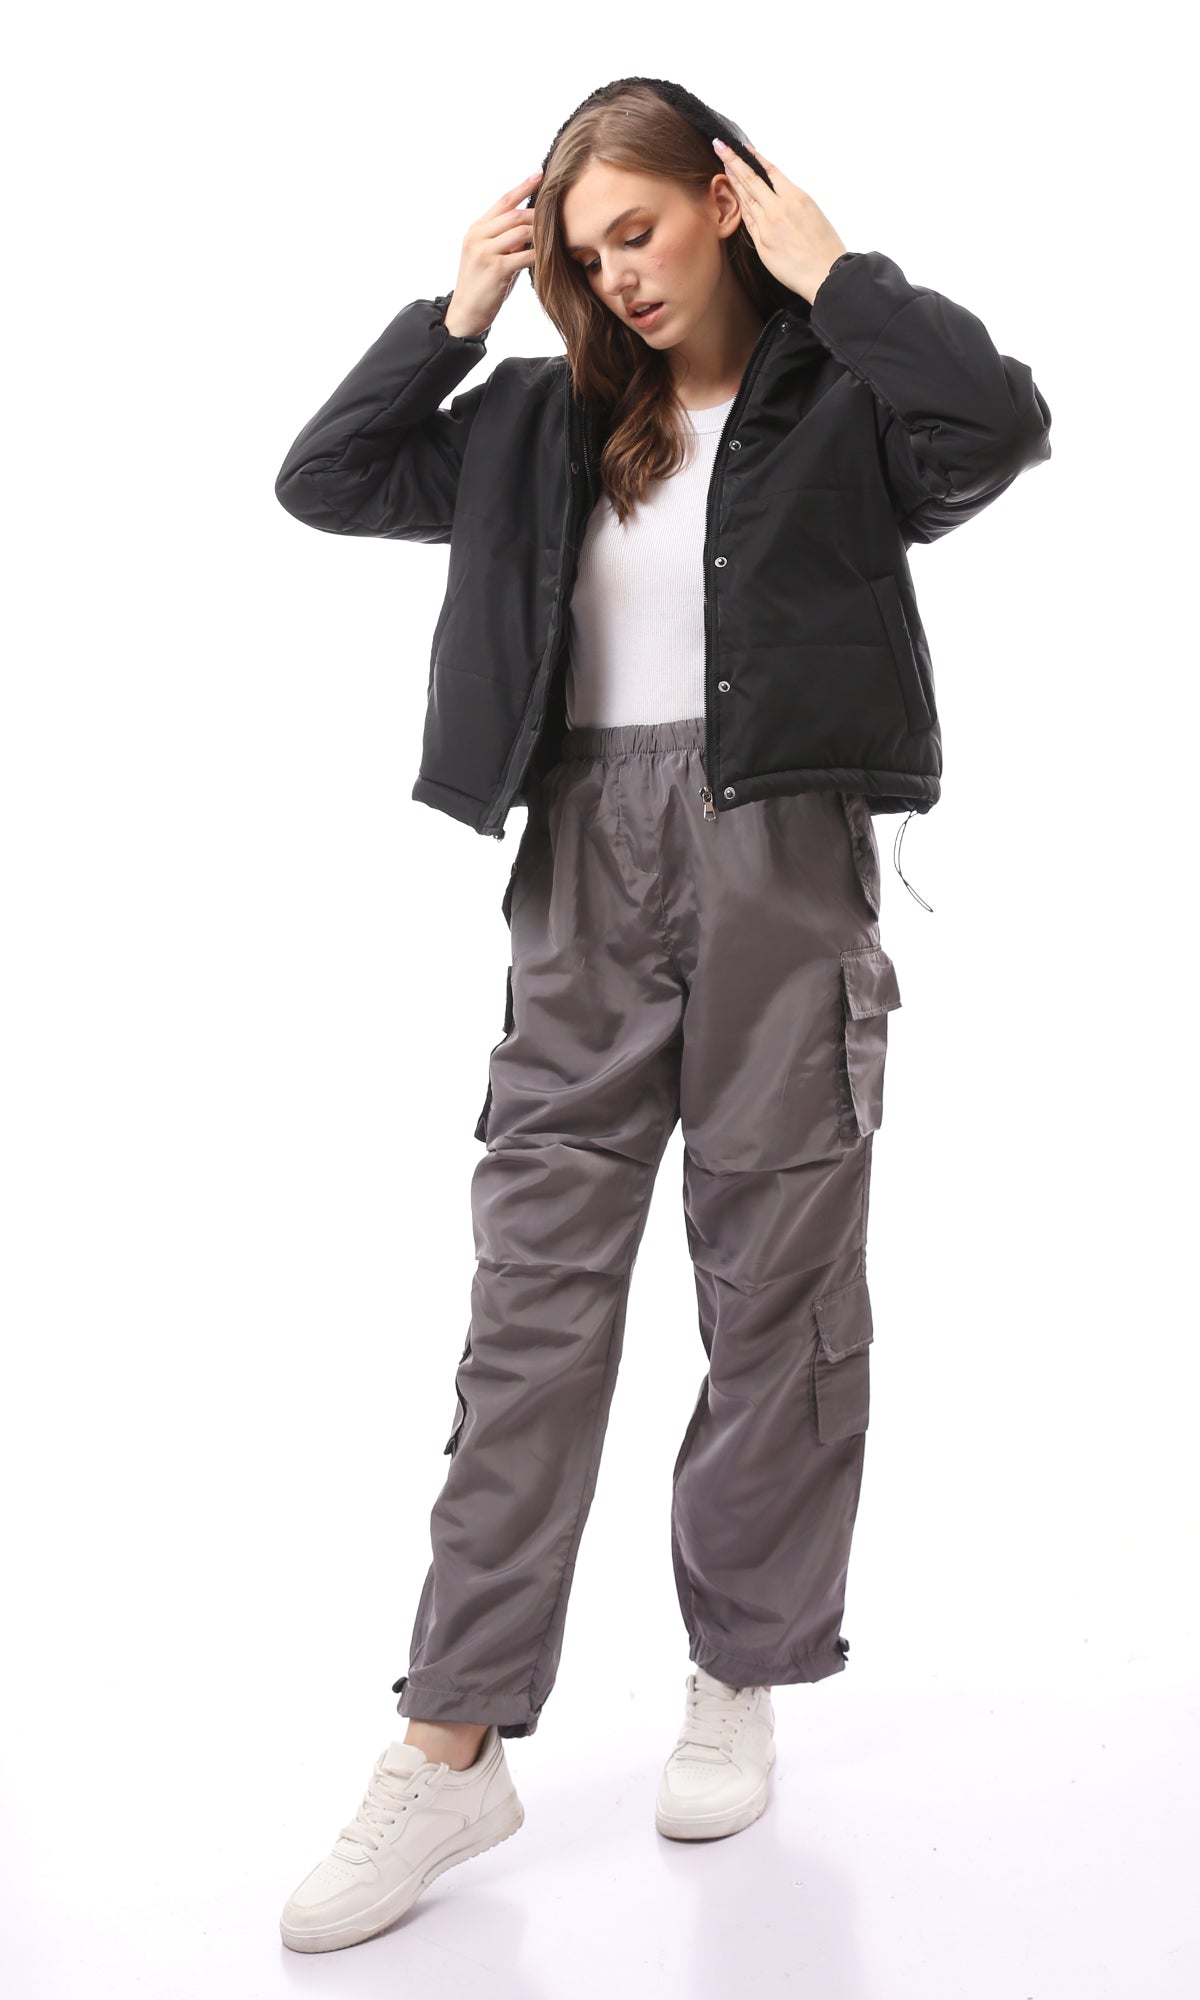 O170601 Dark Grey Waterproof Pants With Patched Pockets